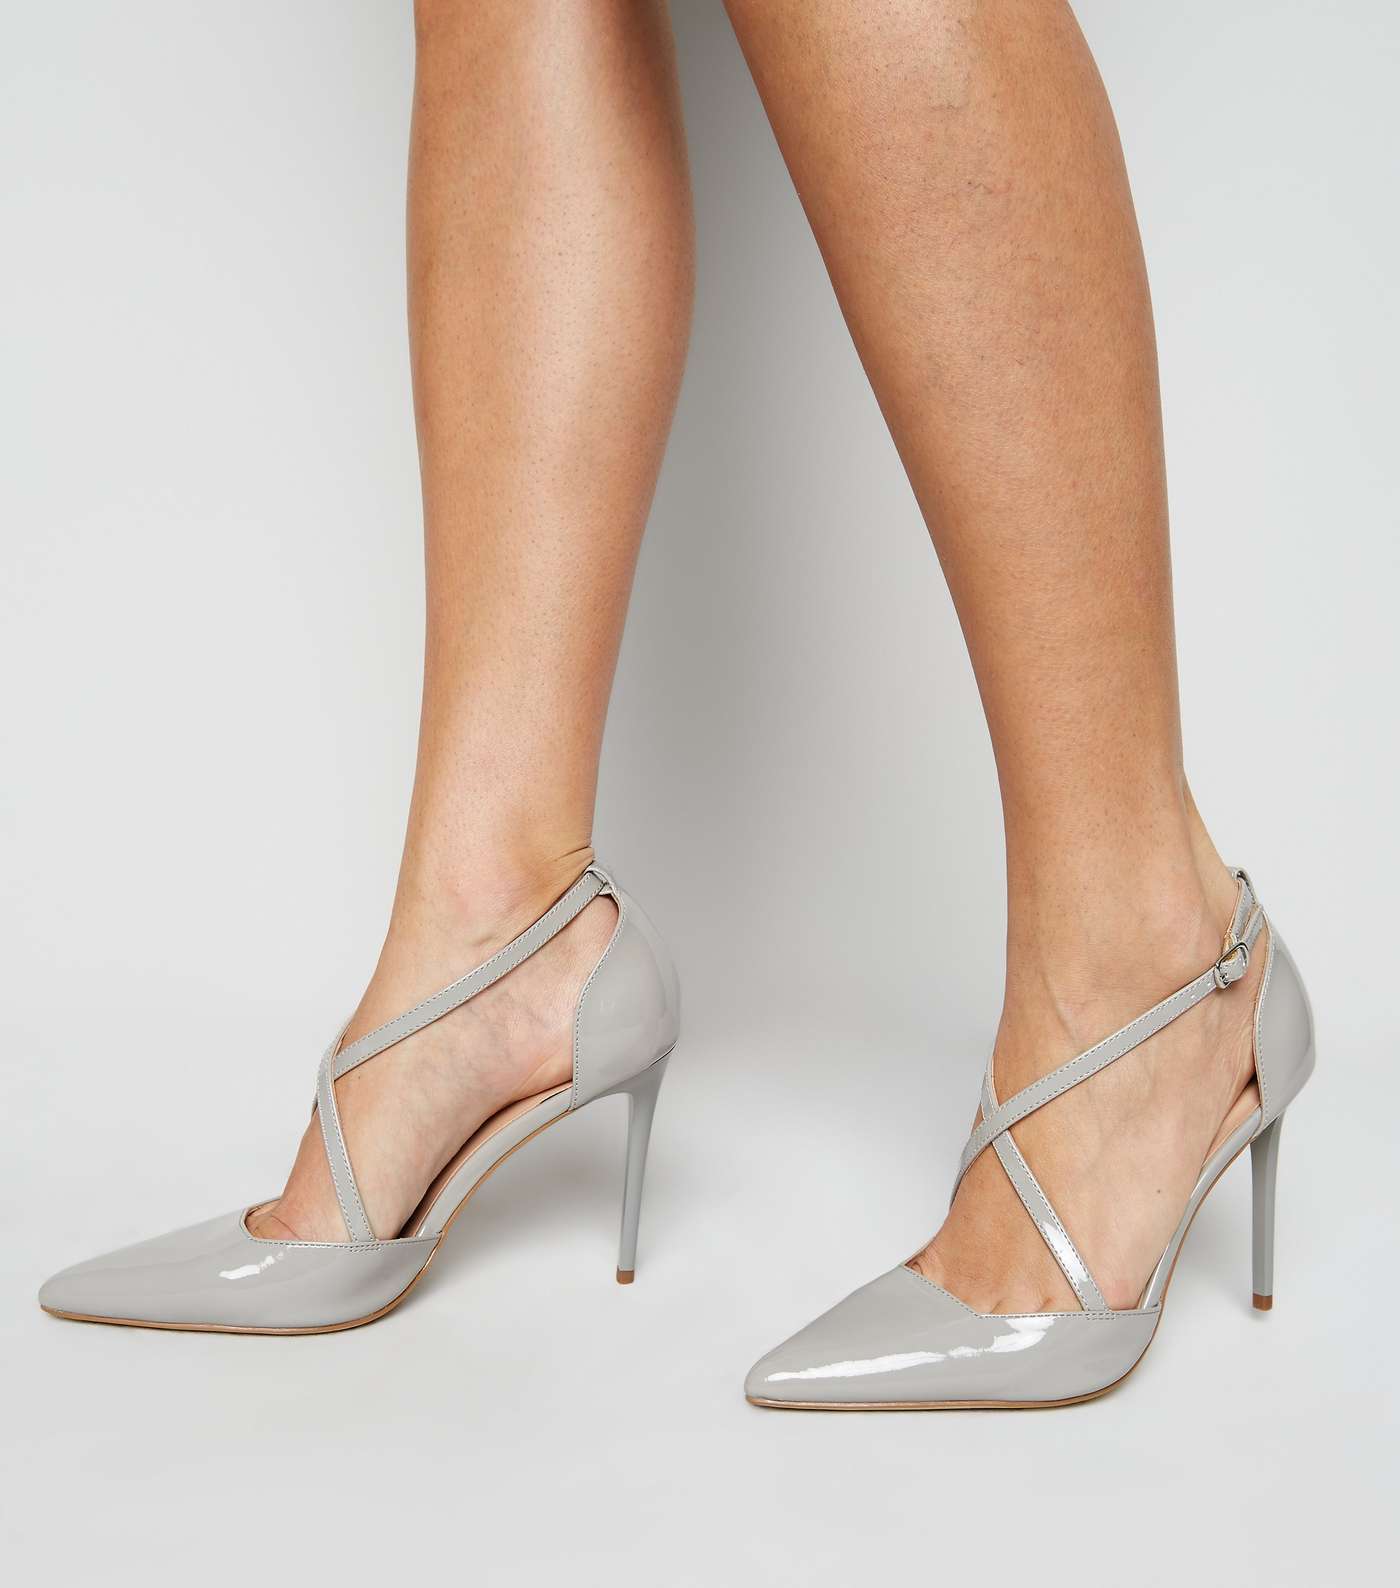 Grey Patent Cross Strap Pointed Stiletto Courts Image 2